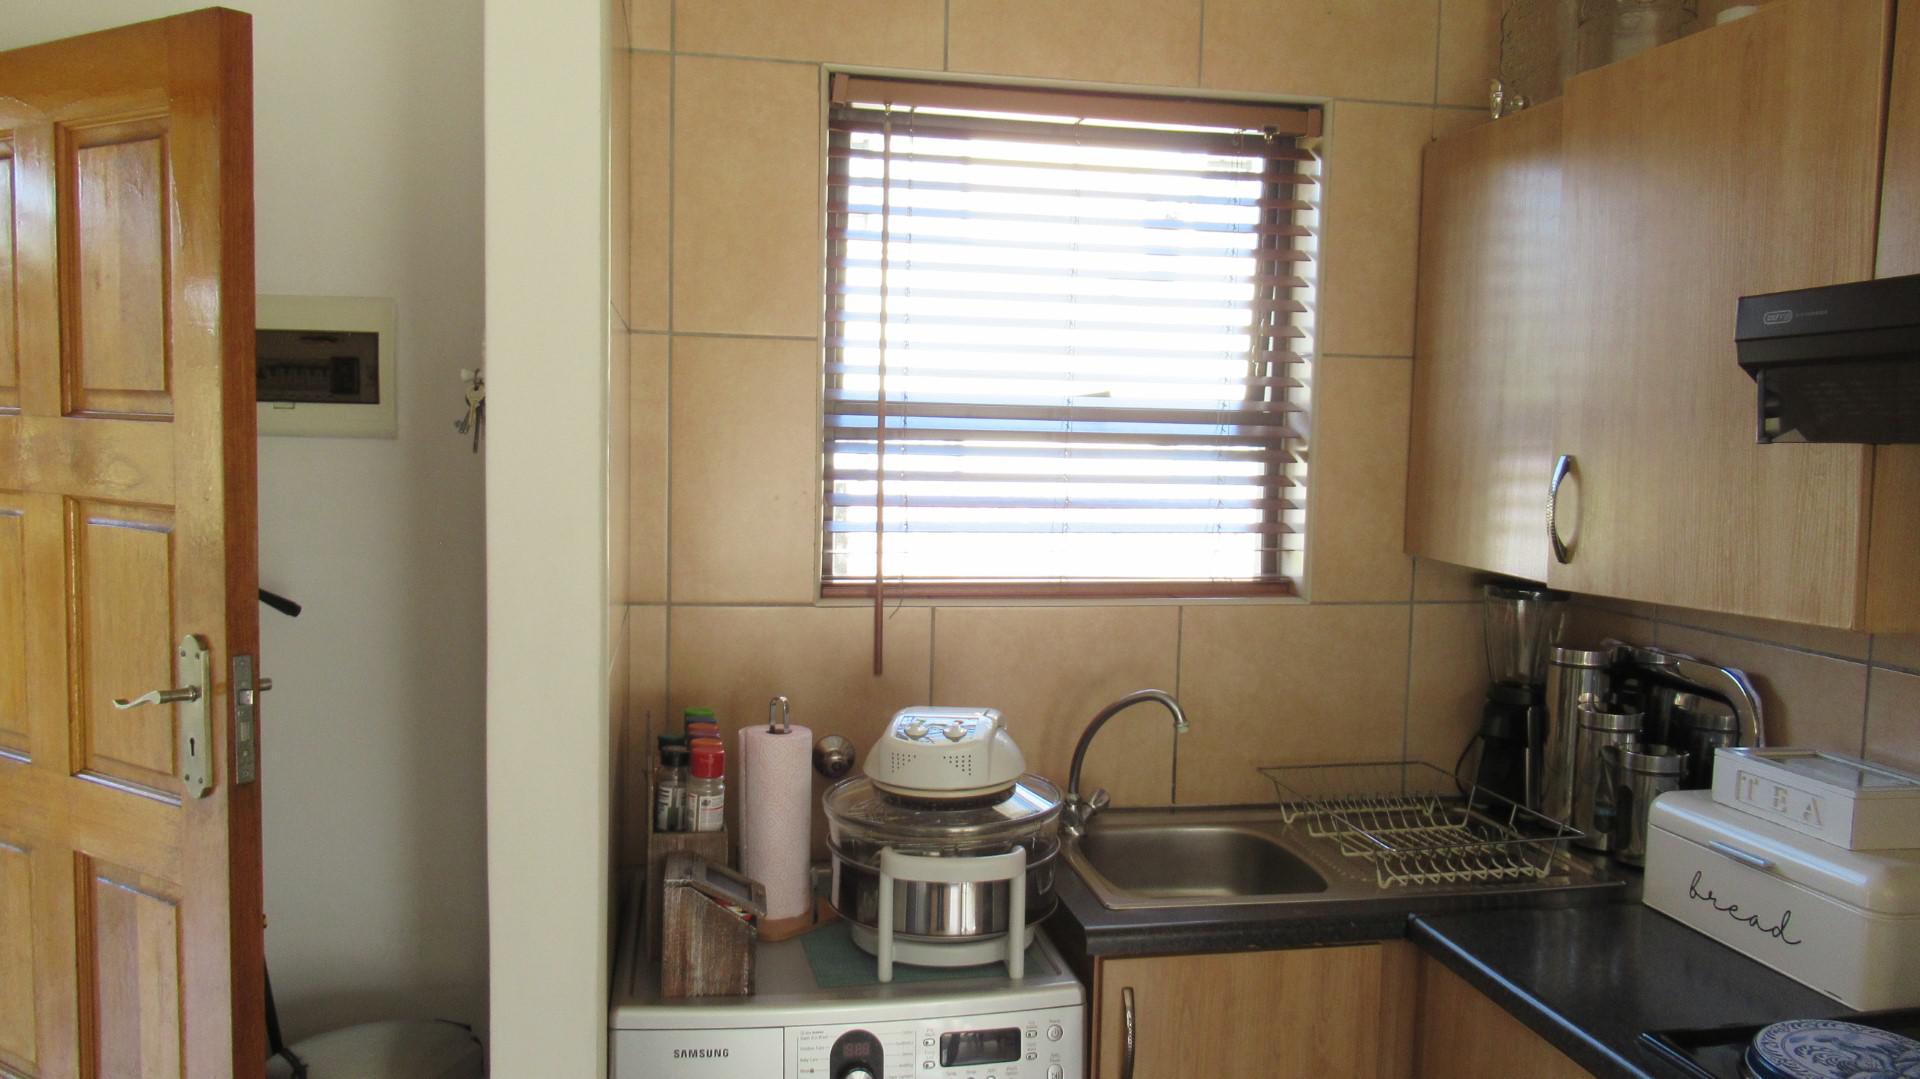 Kitchen - 10 square meters of property in Parkrand